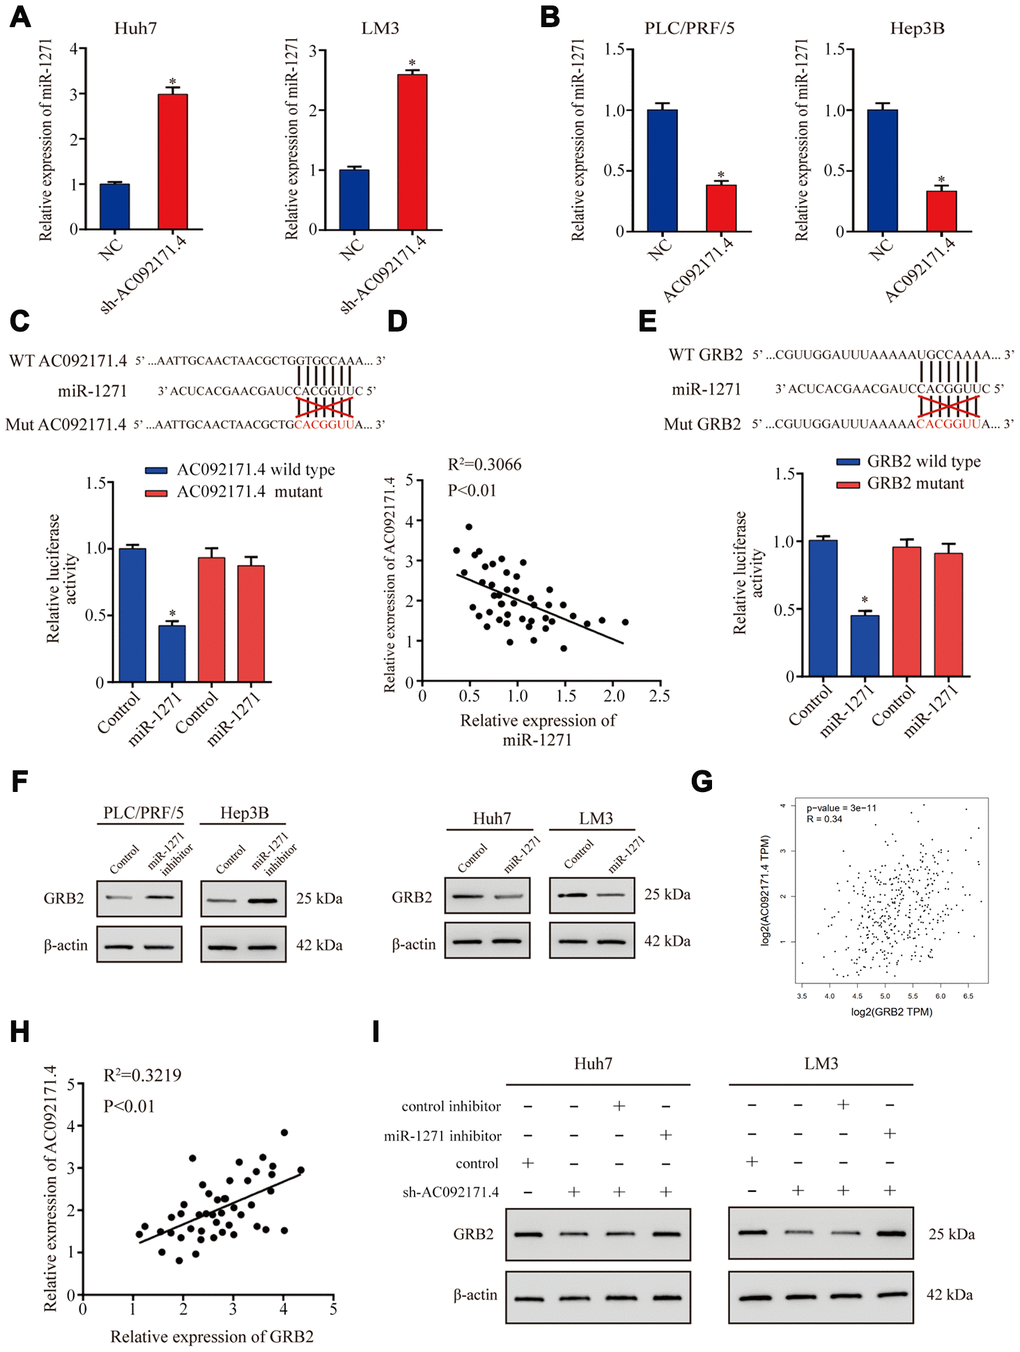 AC092171.4 regulates GRB2 protein expression by competitively binding miR-1271. (A) QRT-PCR analysis shows miR-1271 levels in sh-NC and sh-AC092171.4-transfected HCC cells. (B) QRT-PCR analysis shows miR-1271 levels in control and AC092171.4 overexpressing HCC cells. (C) Dual luciferase reporter assay results show relative firefly luciferase activity in HCC cells transfected with wild-type or mutant AC092171.4 and miR-1271 mimics. (D) Pearson’s correlation analysis shows the association between AC092171.4 and miR-1271 levels in 45 HCC tissue samples from 70 pair HCC specimens. (E) Dual luciferase reporter assay results show relative firefly luciferase activity in HCC cells transfected with WT or mutant 3’UTR of GRB2 and miR-1271 mimics. (F) Western blot results show GRB2 protein levels in HCC cells transfected with miR-1271 mimics or miR-1271 inhibitors. (G) Pearson’s correlation analysis shows the relationship between AC092171.4 and GRB2 mRNA levels in HCC tissues from the TCGA datasets in GEPIA website. (H) Pearson’s correlation analysis shows the relationship between AC092171.4 and GRB2 mRNA levels in HCC tissues from the TCGA datasets. (I) Western blot analysis shows GRB2 protein expression in HCC cells transfected with AC092171.4-shRNA plus miR-1271 inhibitor or AC092171.4-shRNA alone. * denotes p